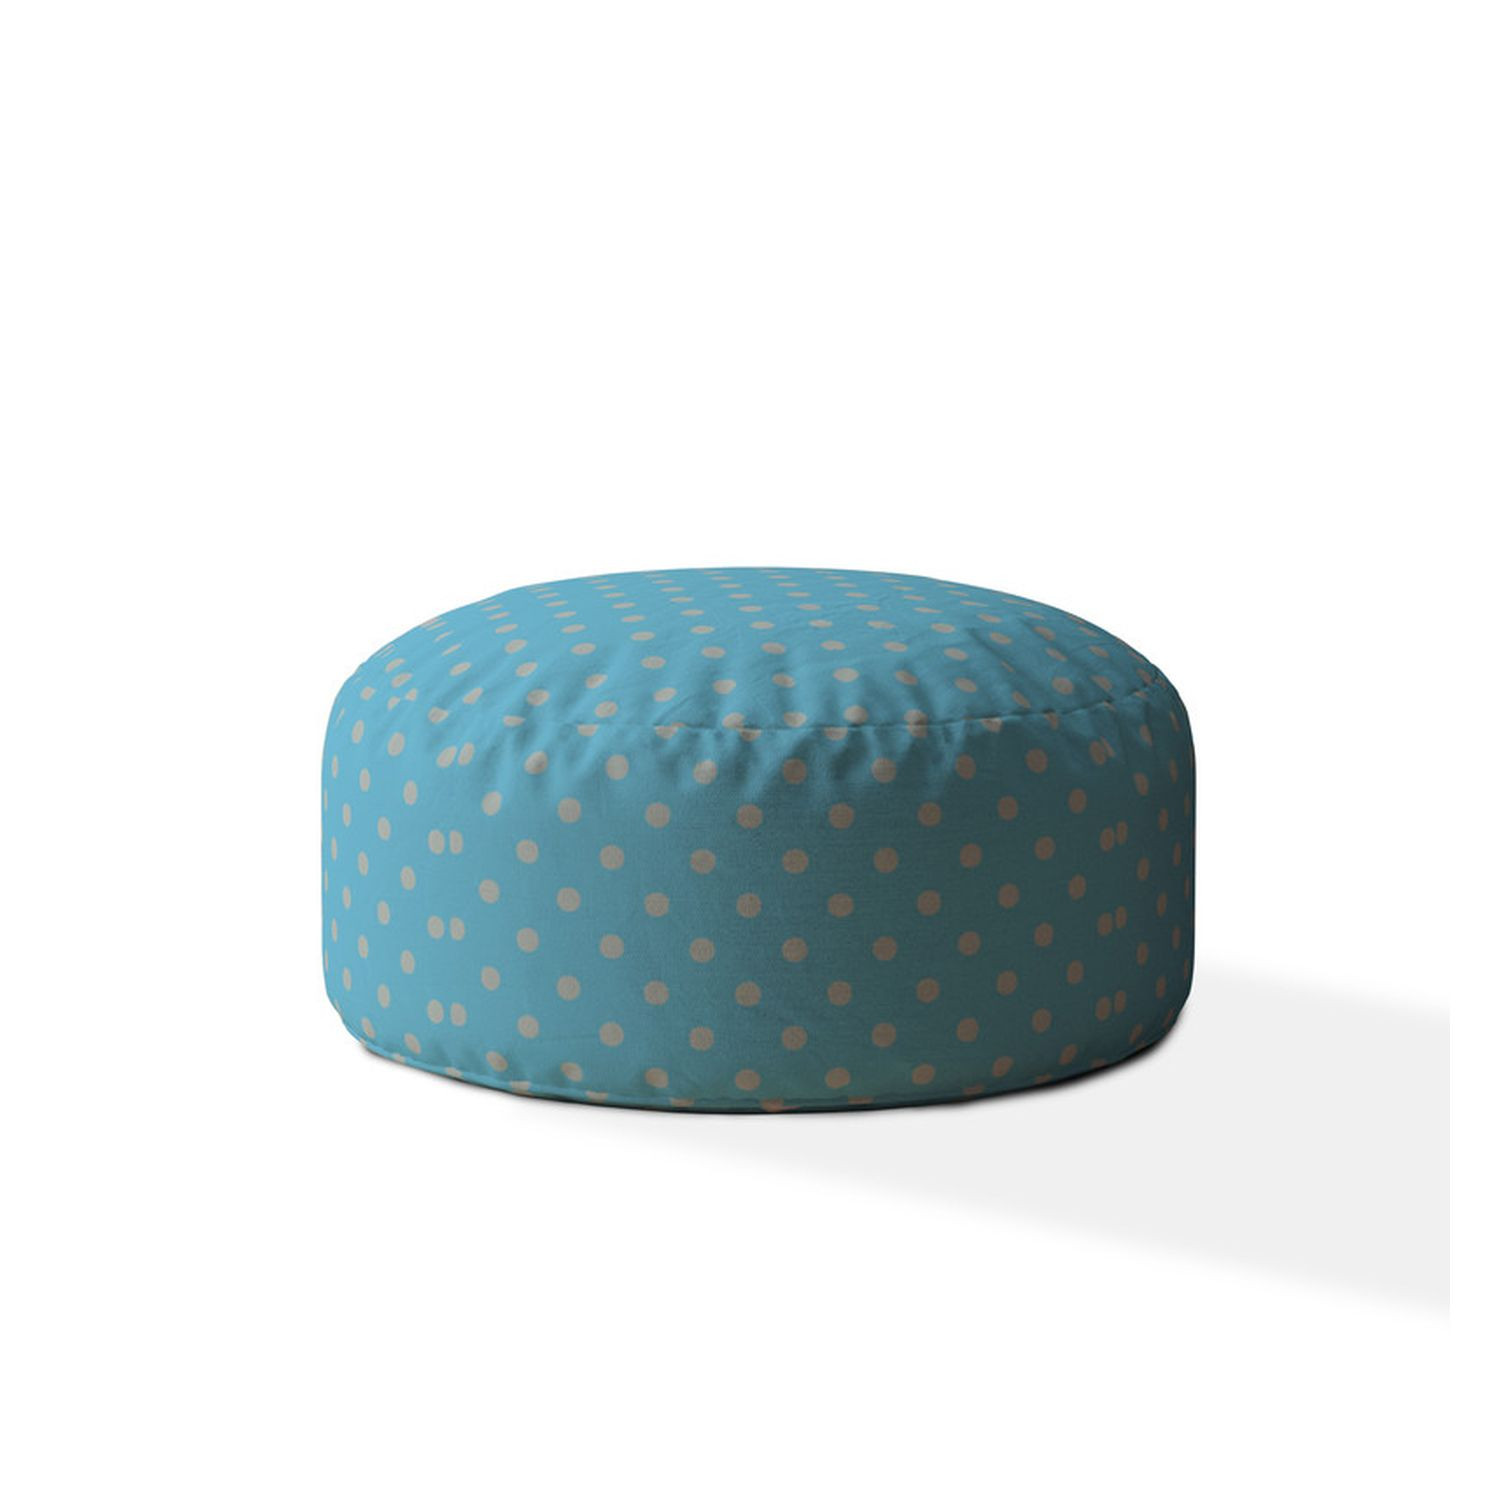 24" Blue And Gray Cotton Round Polka Dots Pouf Cover-518516-1